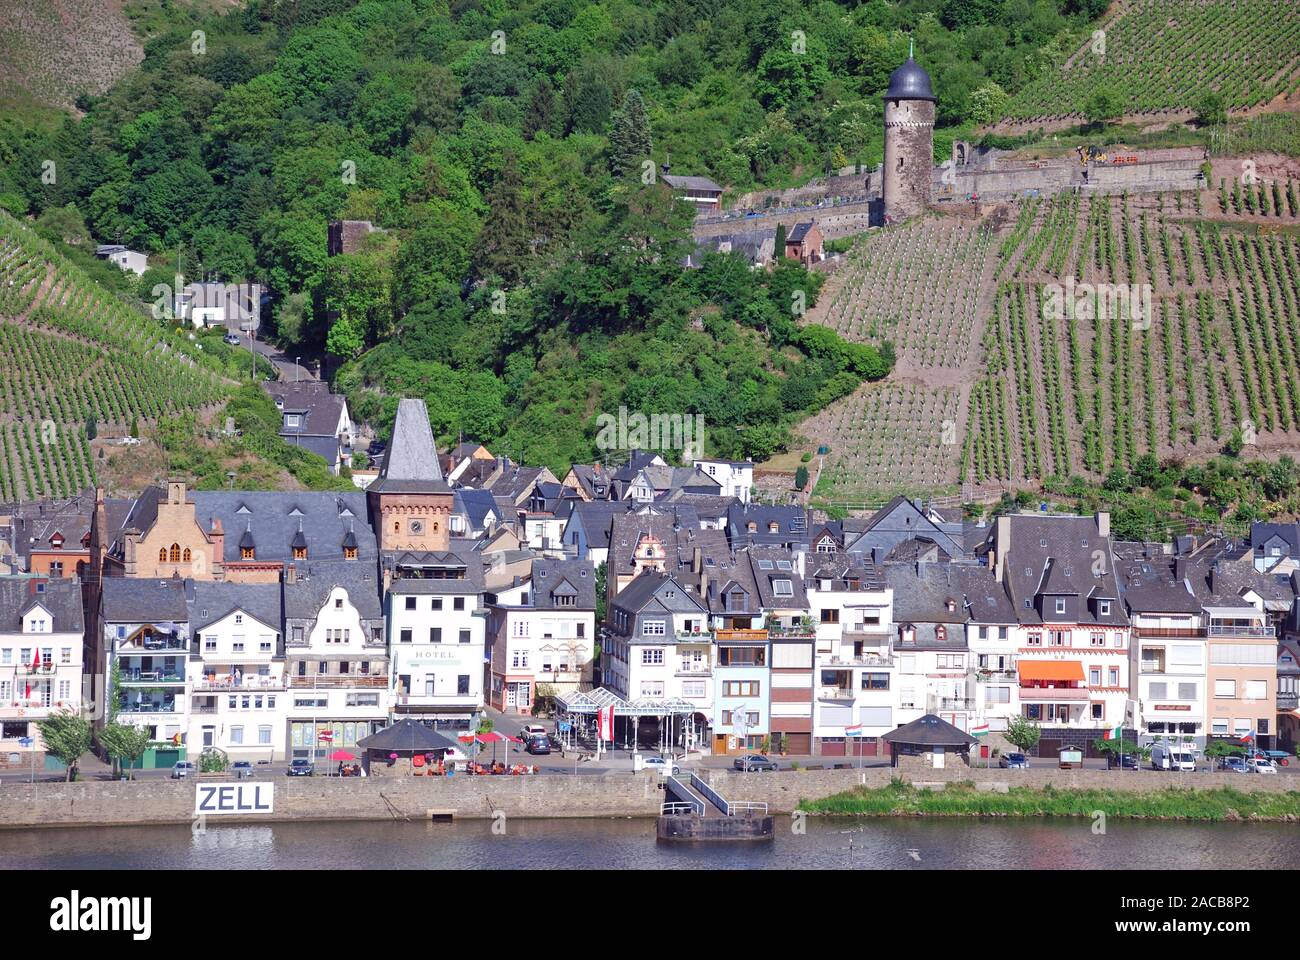 The romantic winegrowing village of Zell an der Mosel, Rhineland-Palatinate, Germany, Europe Stock Photo